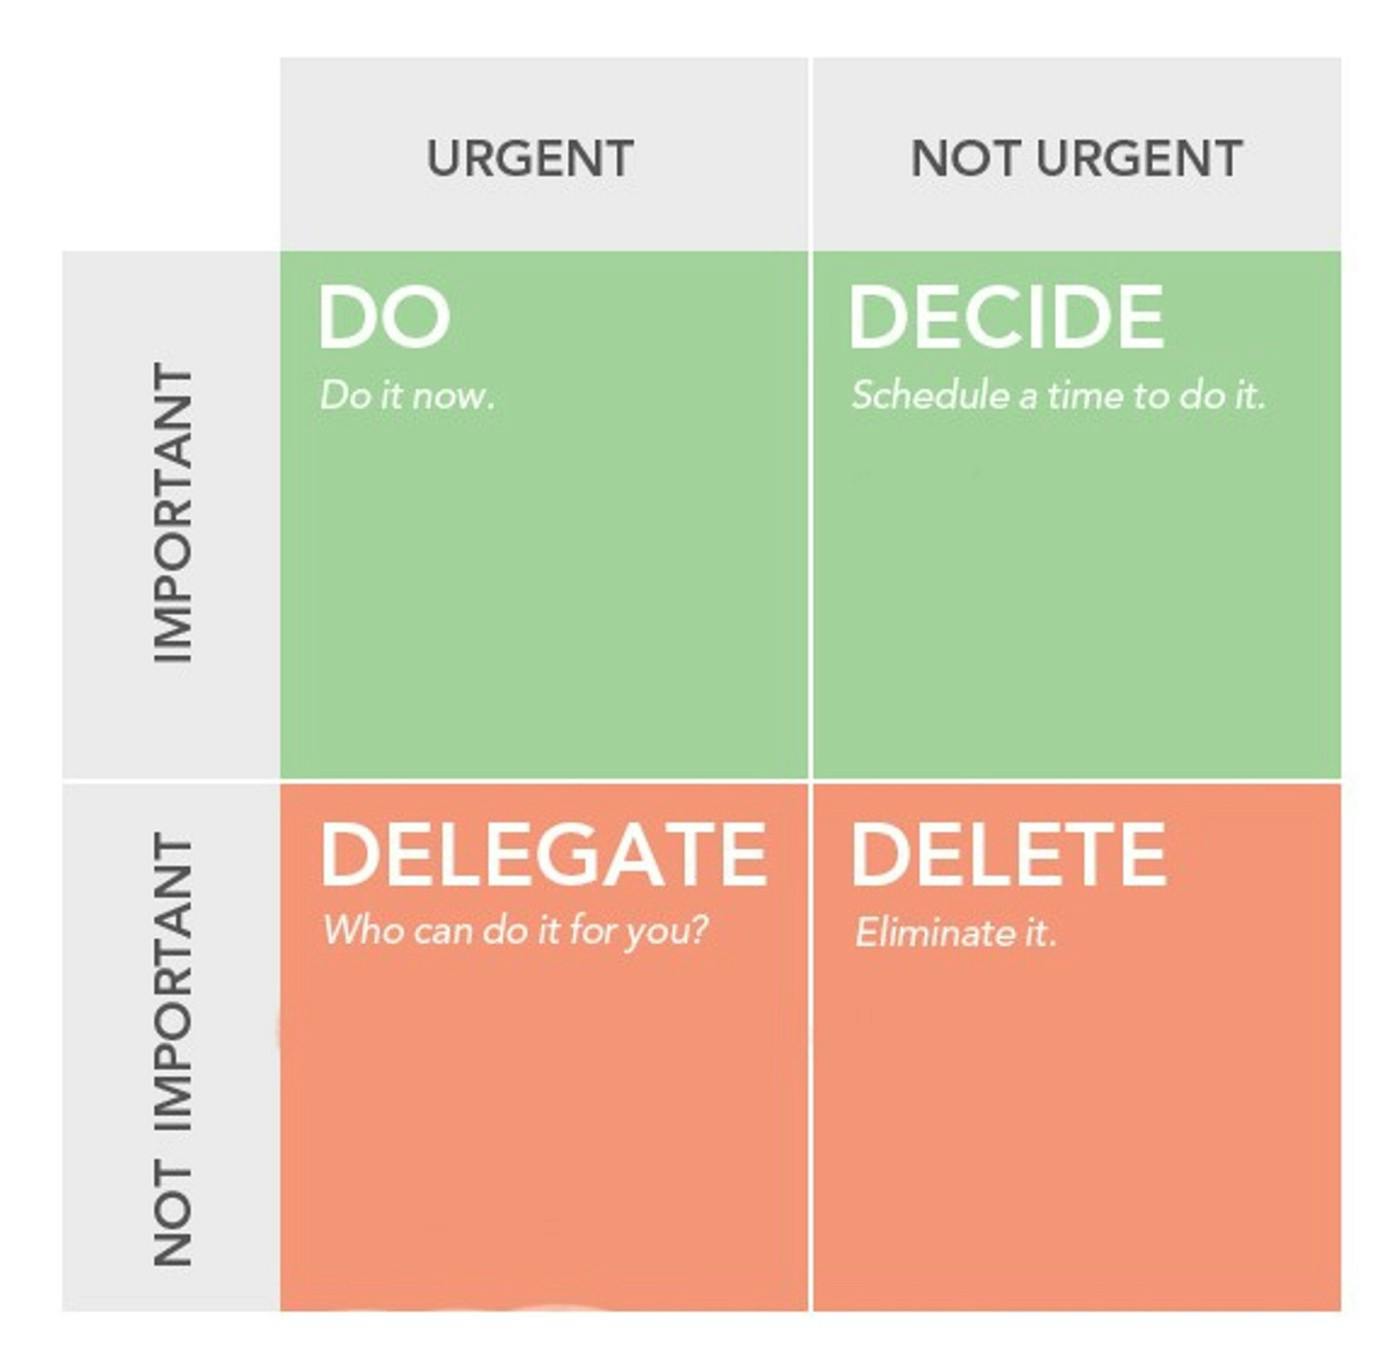 A 2x2 grid with column and row labels. Column labels are “Urgent” and “Not Urgent.” Row labels are “Important” and “Not Important.” For the grid values, Important and Urgent intersect at “Do.” Important and Not Urgent intersect at “Decide.” Not Important and Urgent intersect at “Delegate.” Not Important and Not Urgent intersect at “Delete.”